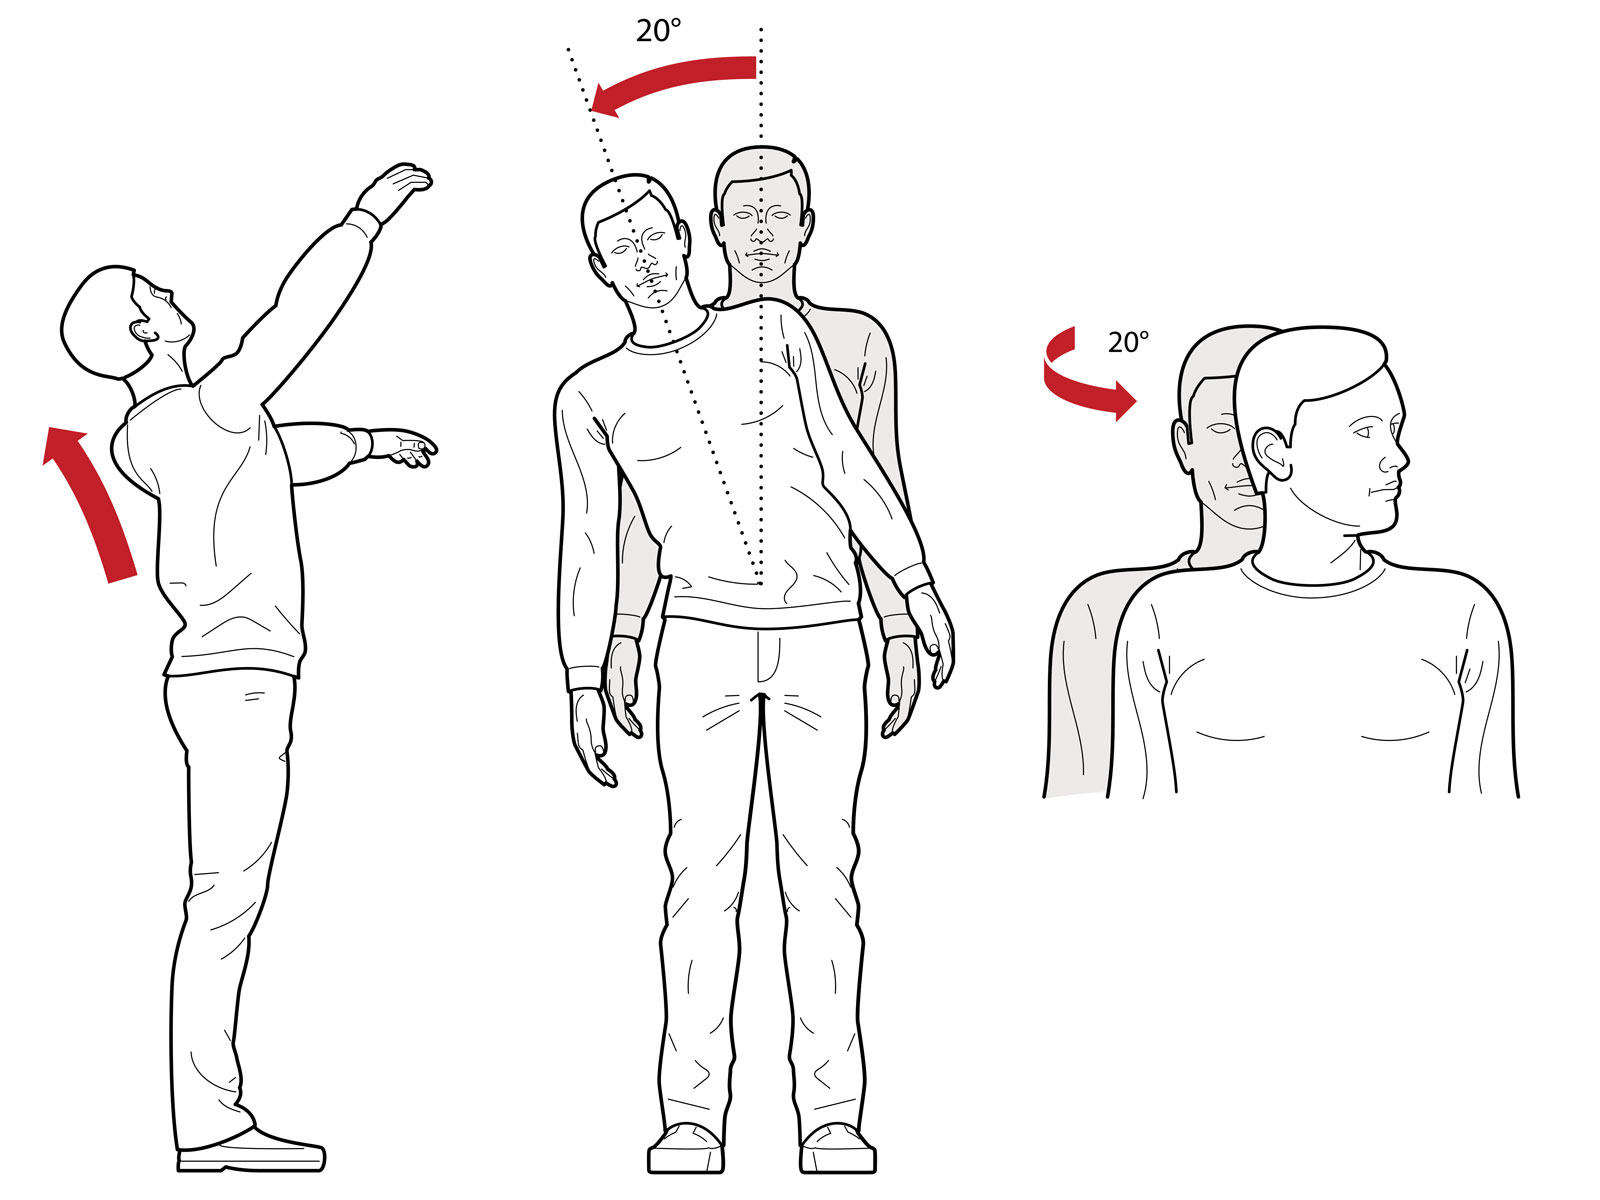 OHS diagrams showing repetitive head and back movements